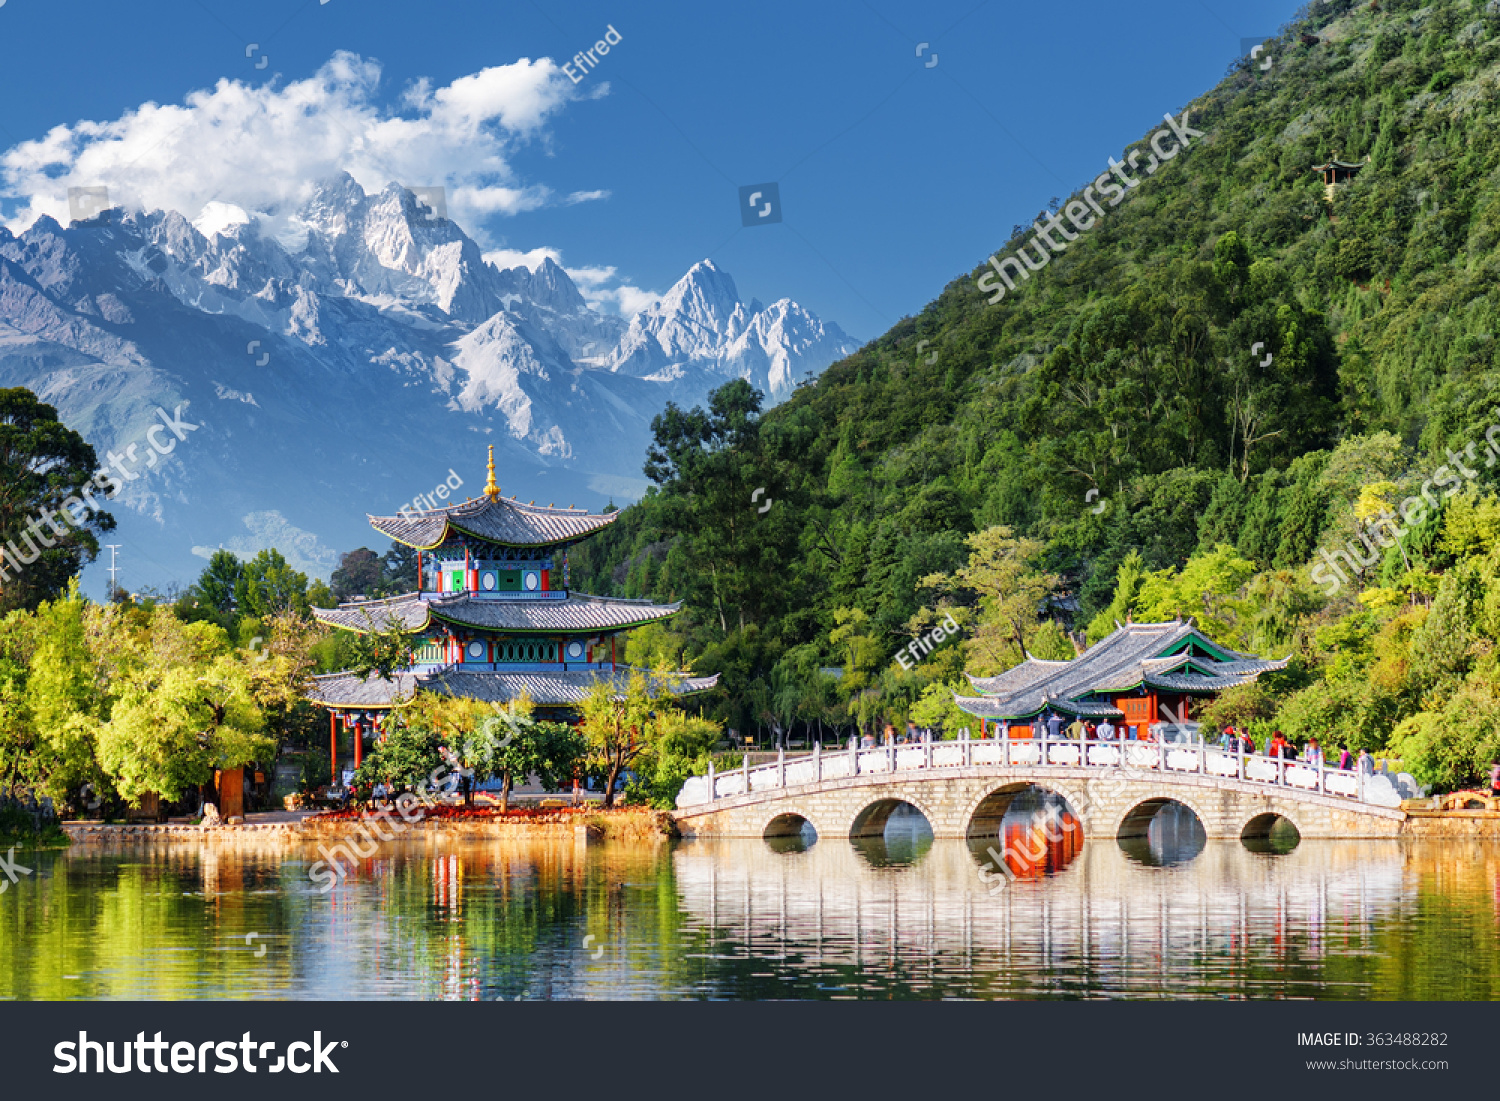 Amazing view of the Jade Dragon Snow Mountain and the Black Dragon Pool, Lijiang, Yunnan province, China. The Suocui Bridge over pond and the Moon Embracing Pavilion in the Jade Spring Park. #363488282